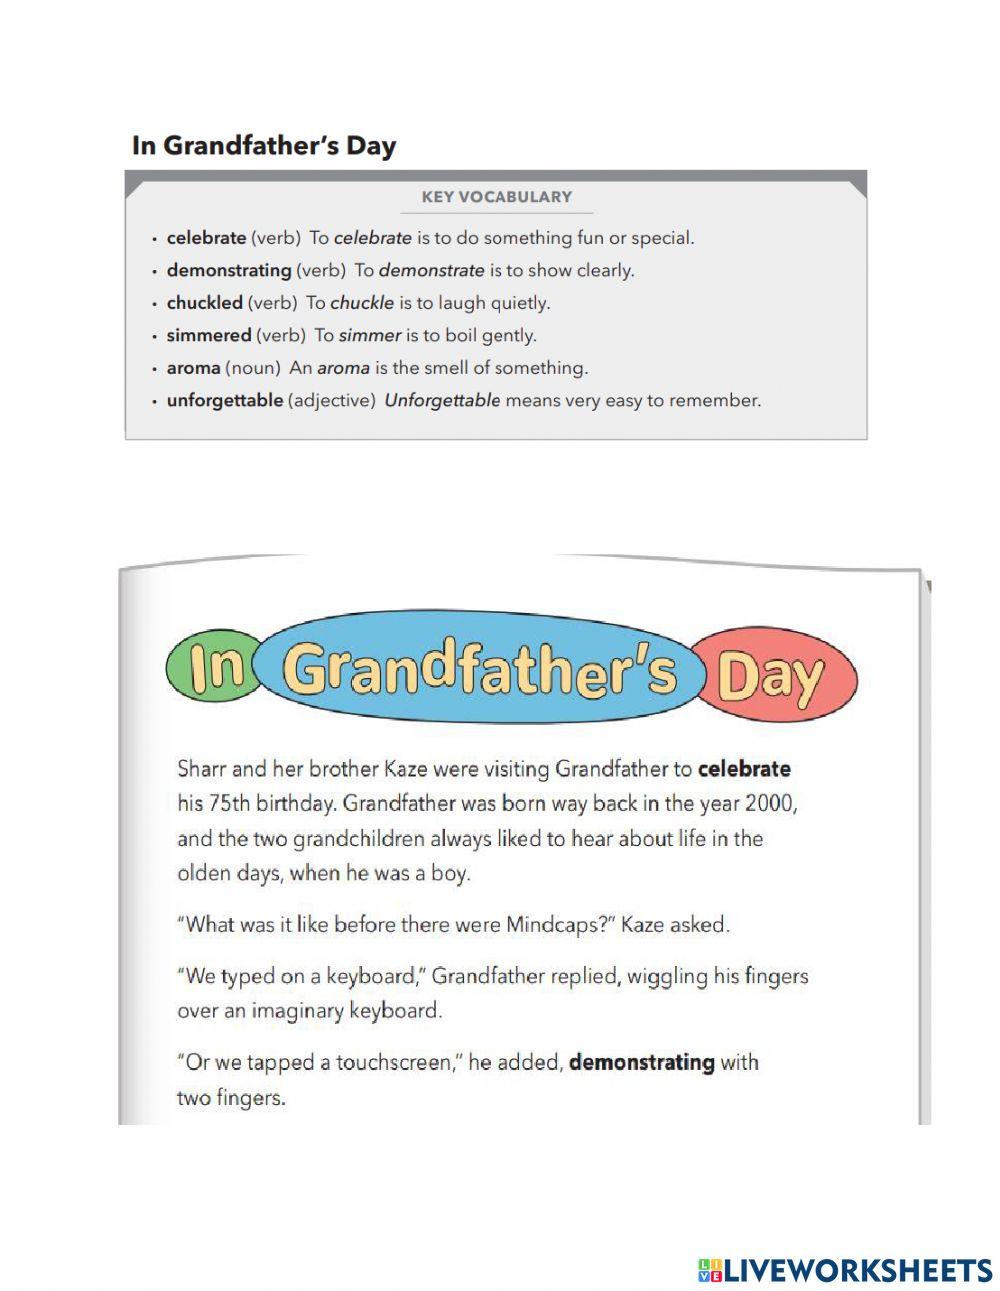 Lexia close reads level 15 In Grandfather's day